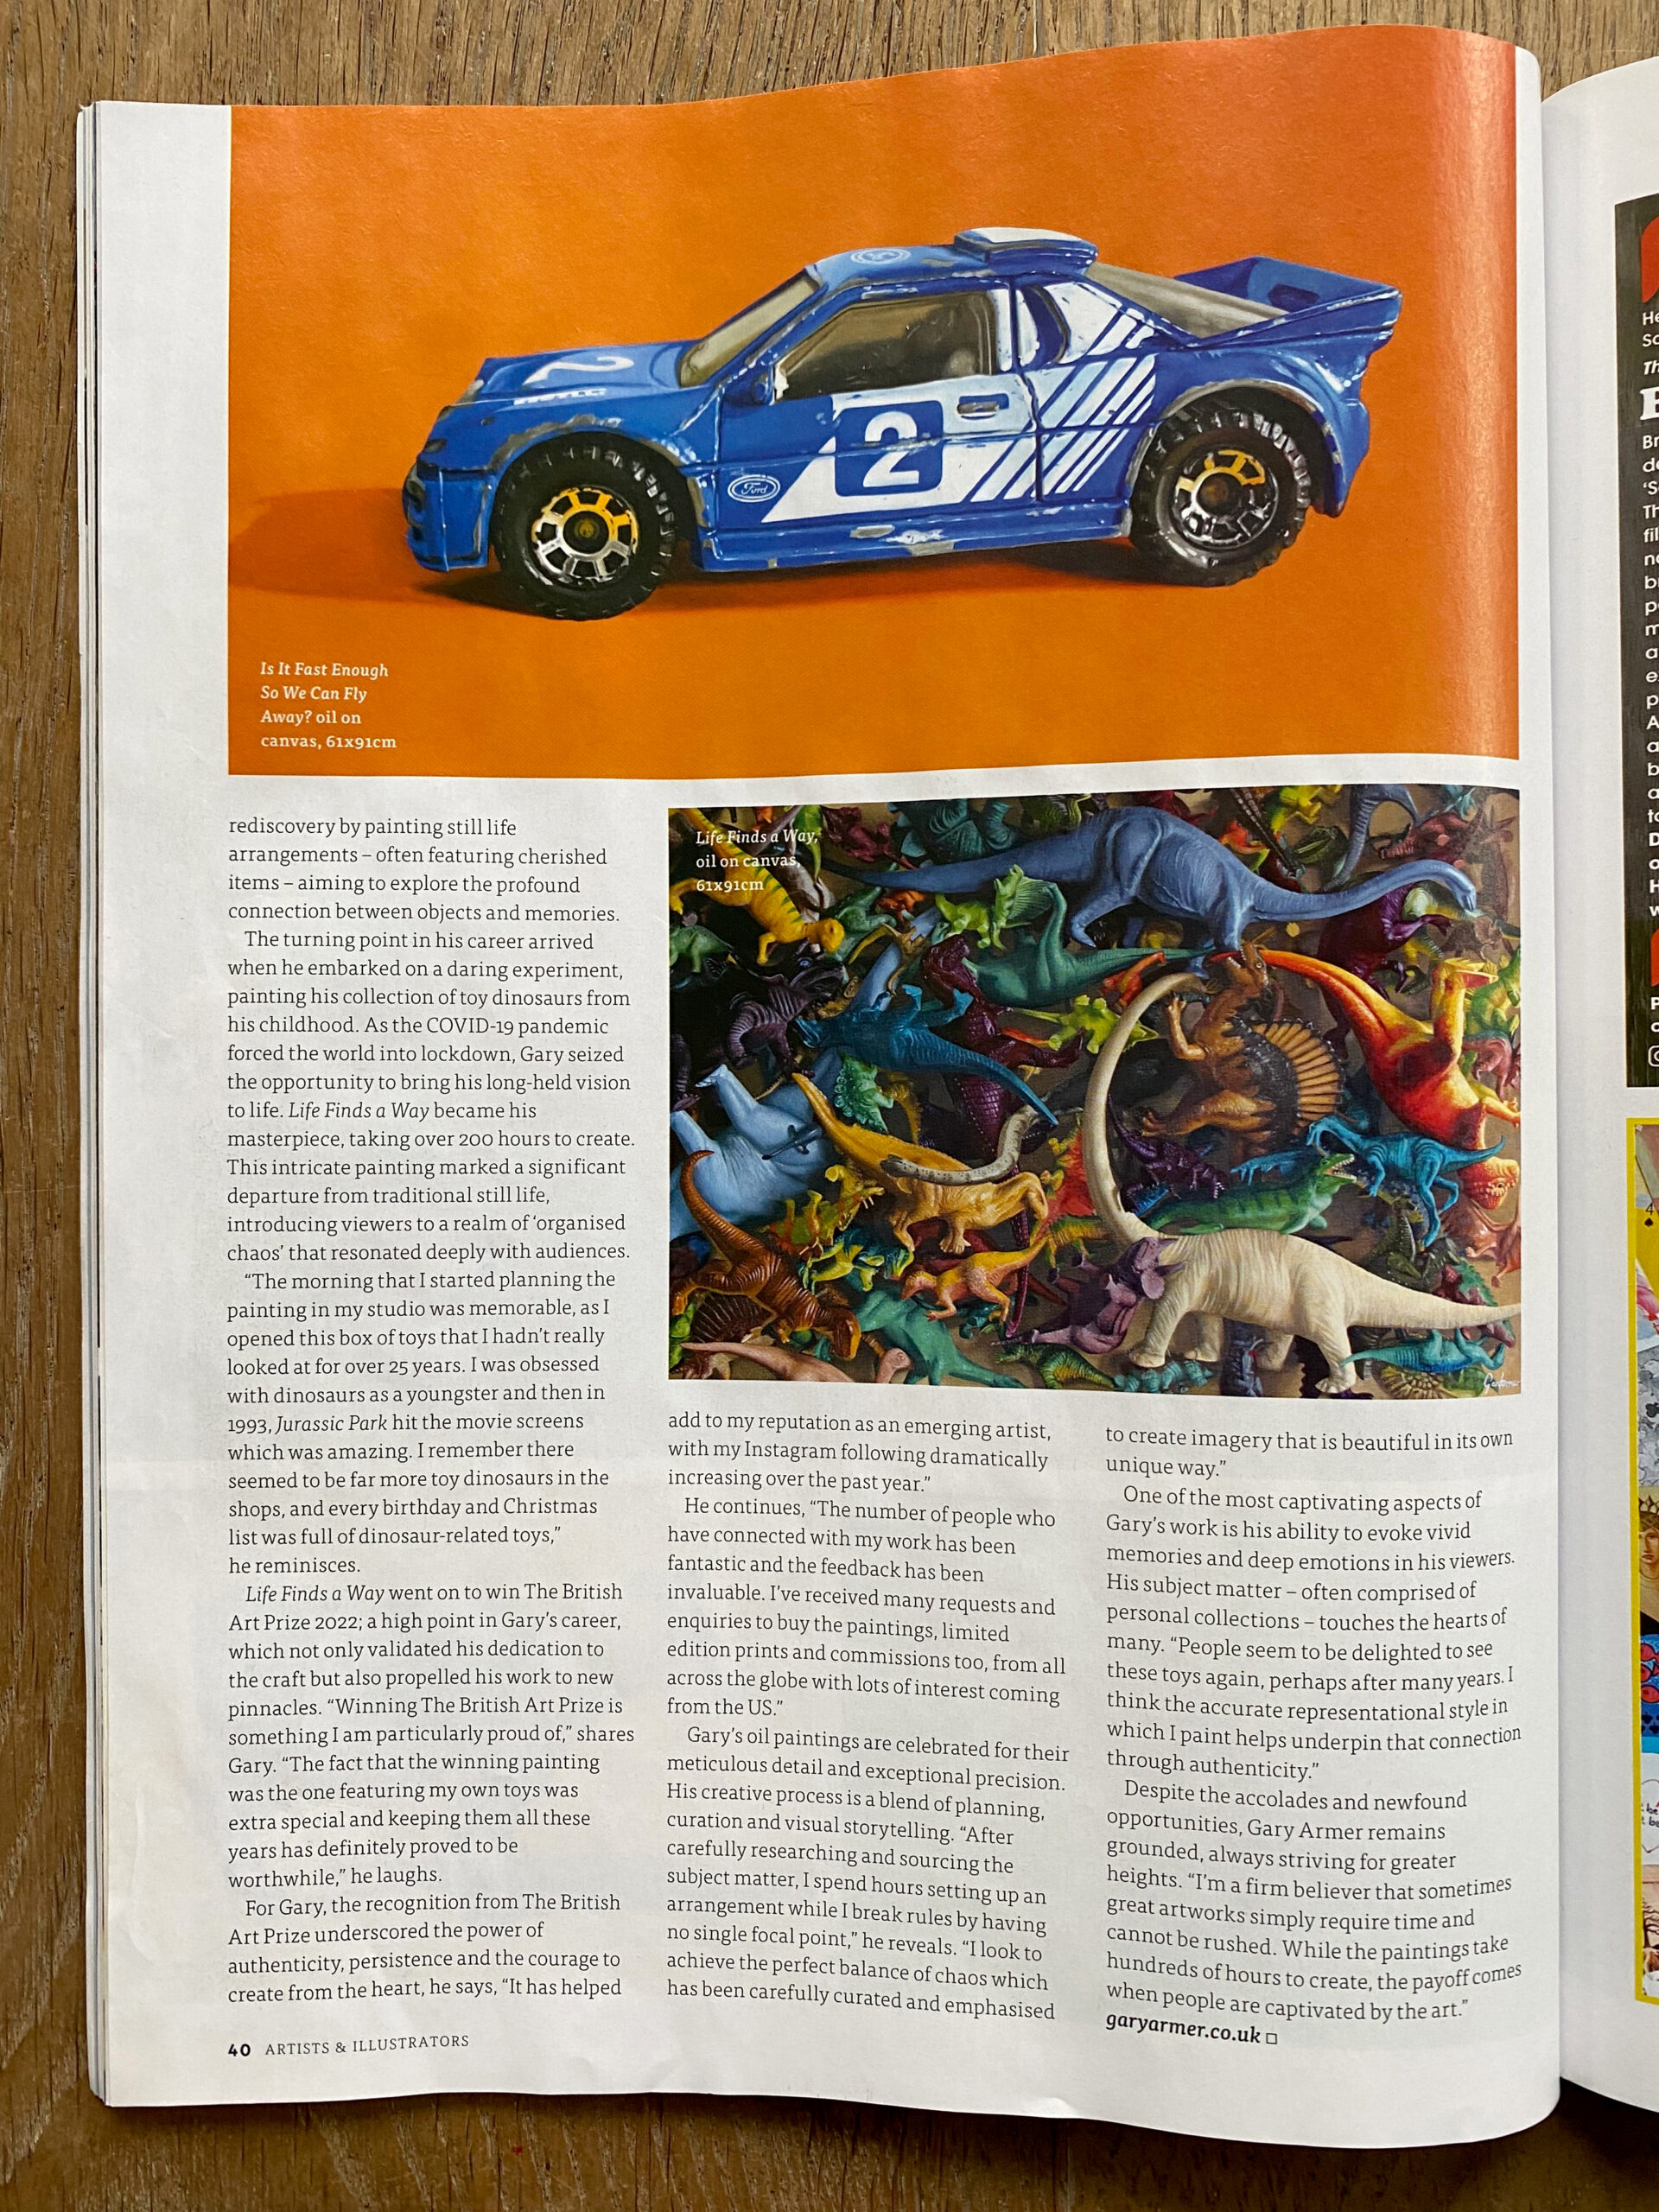 Gary Armer Artists and Illustrators Article